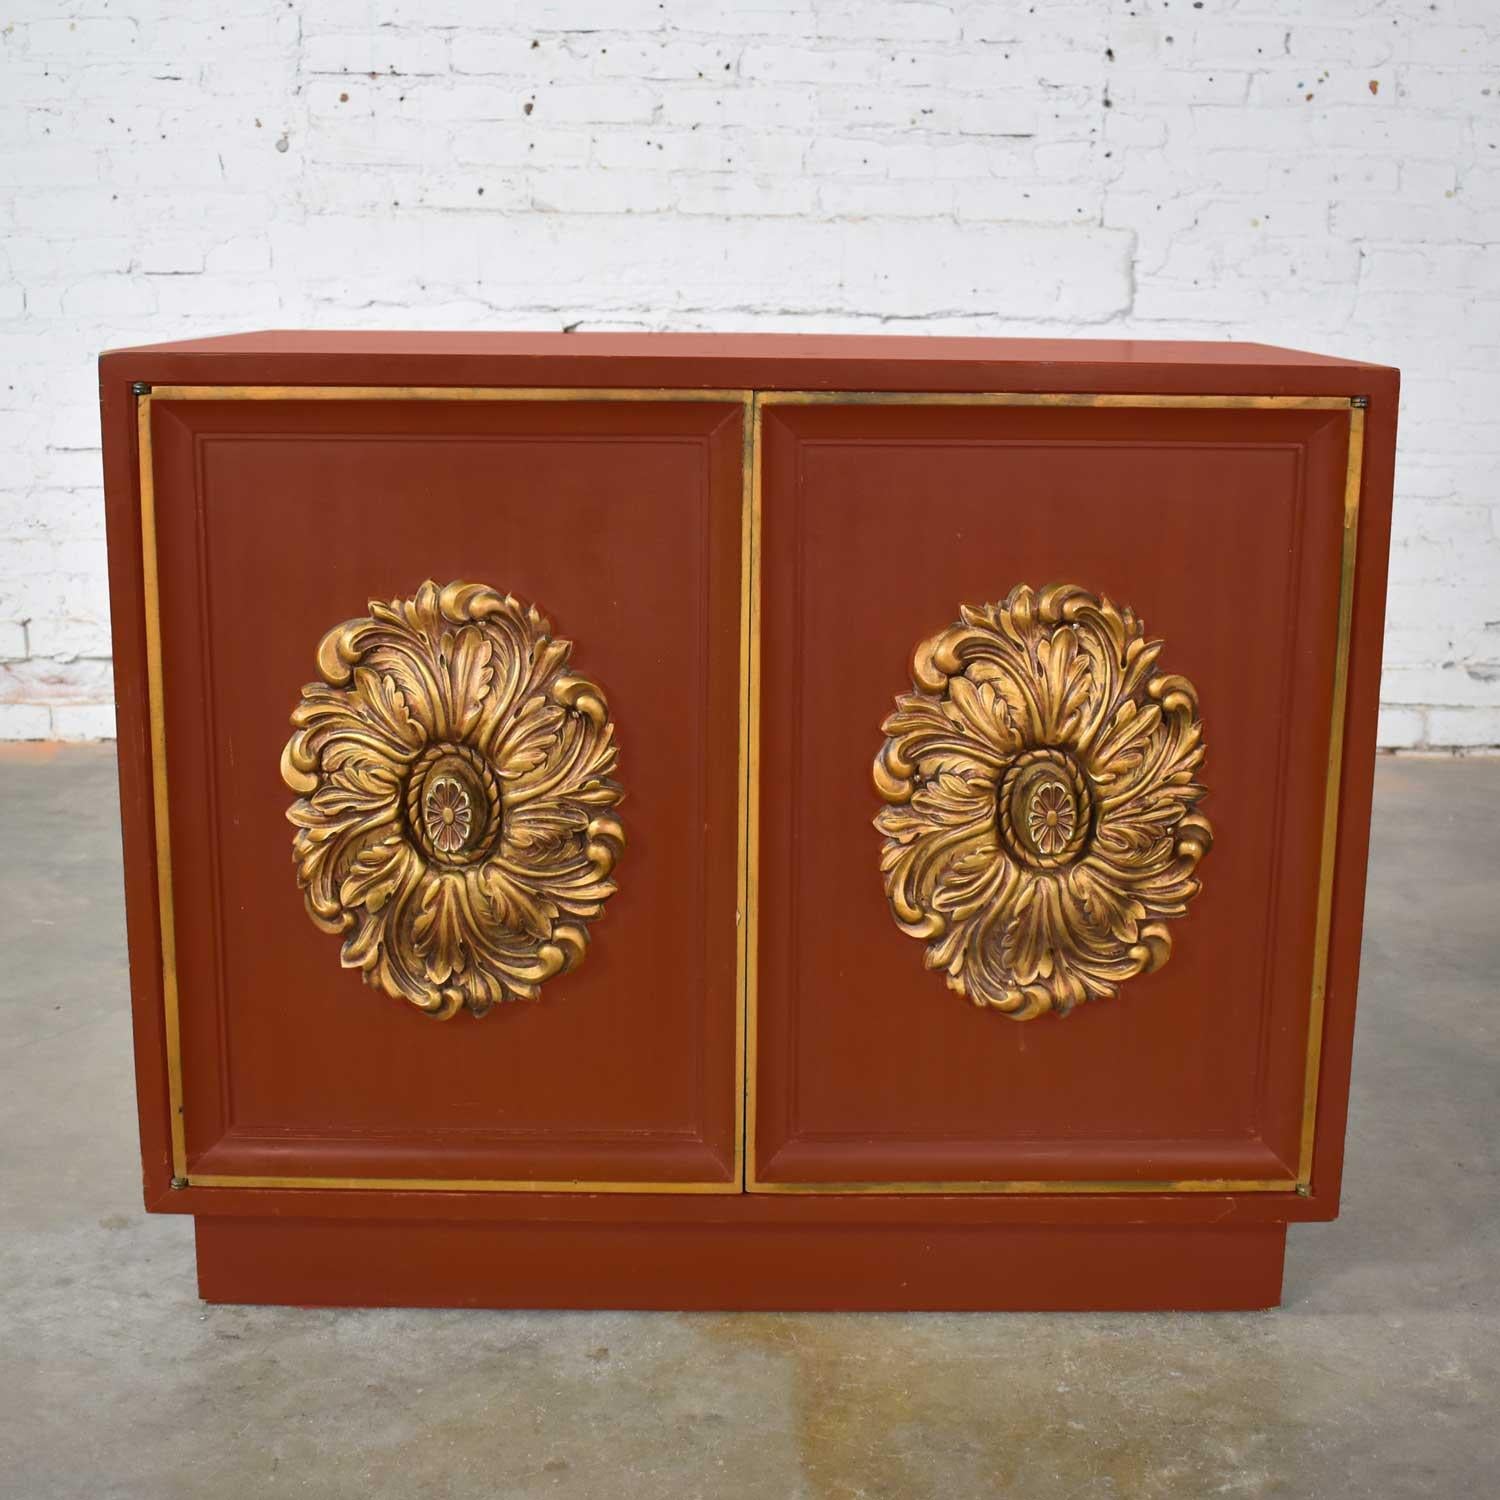 Midcentury Hollywood Regency Lane Small 2 Door Credenza Style J Mont or D Draper For Sale 5